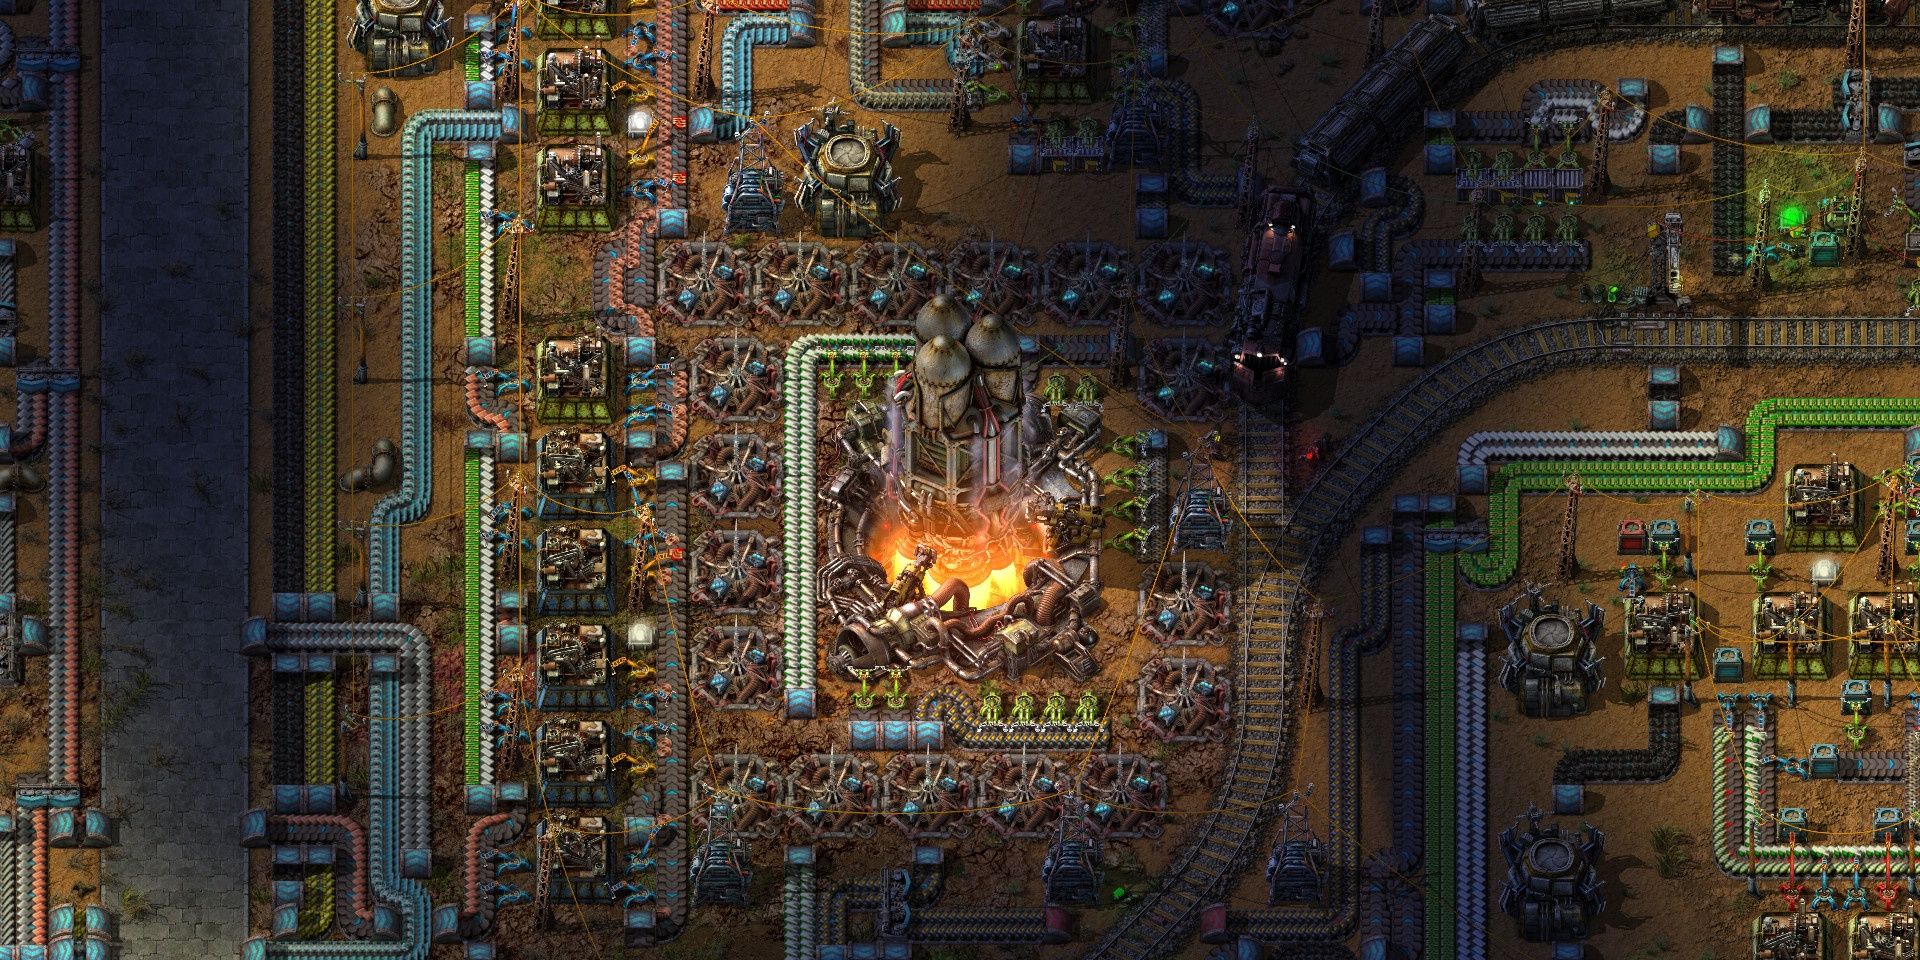 A rocket being launched from a factory in Factorio